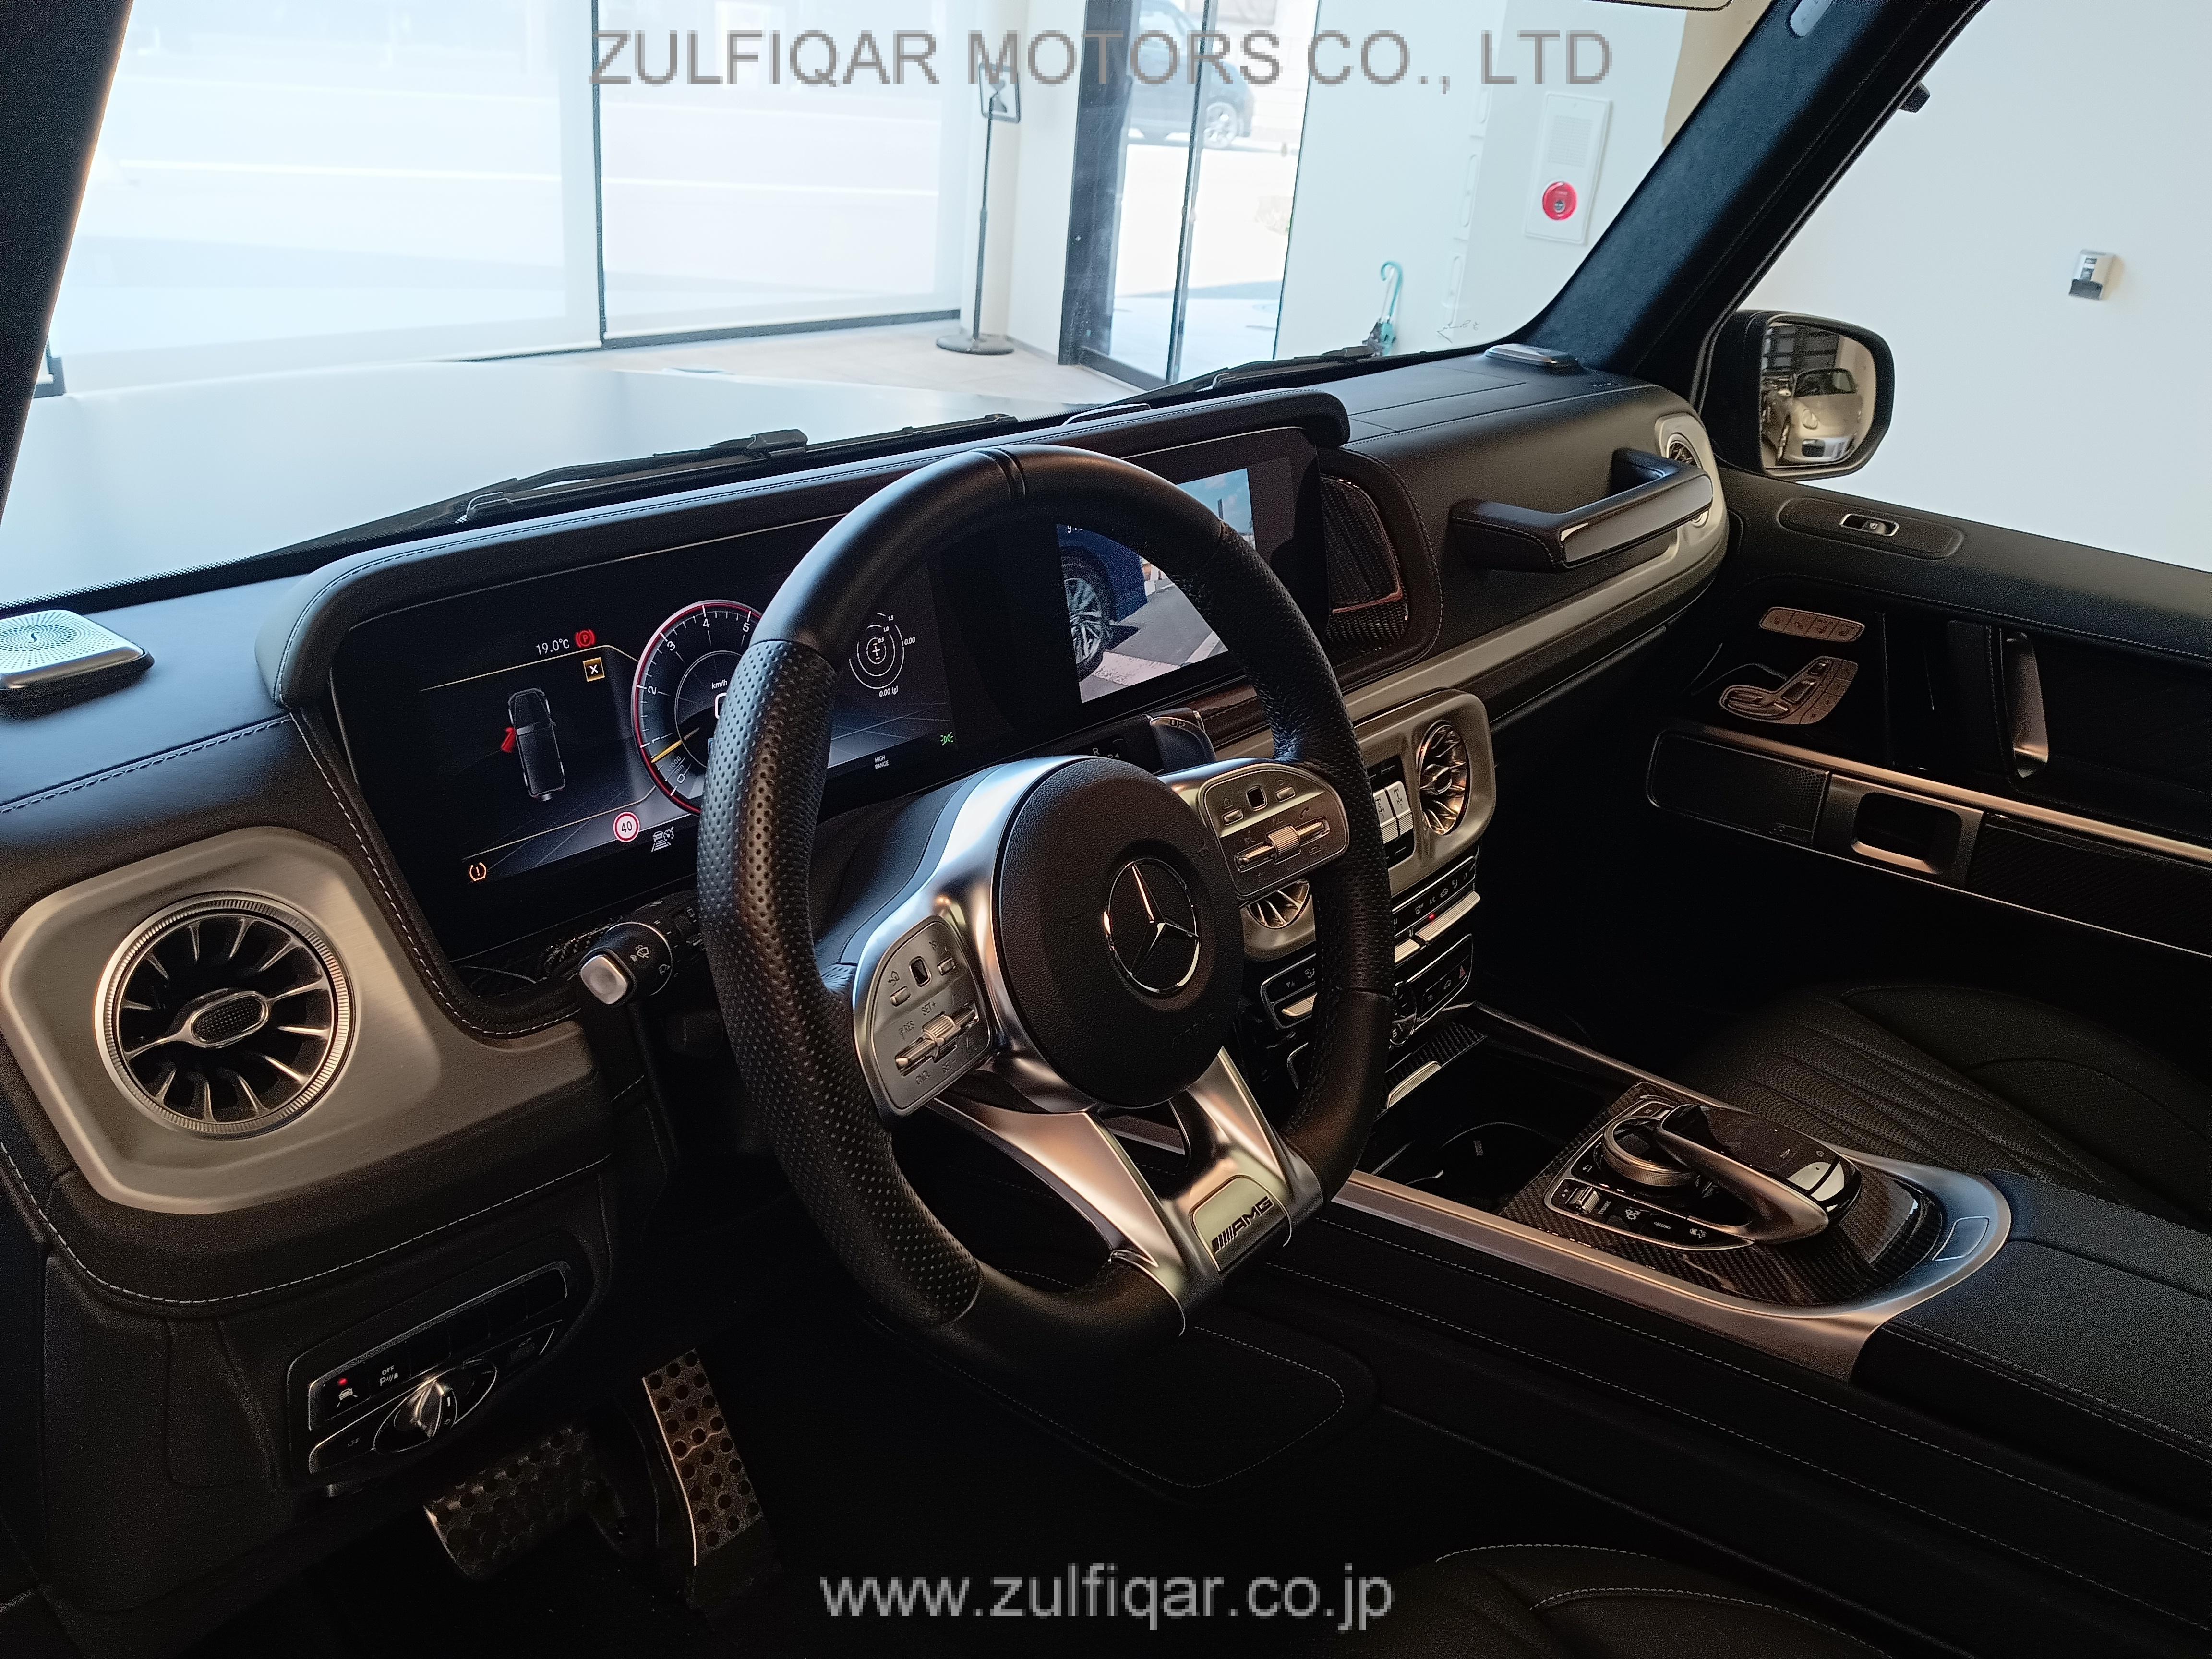 MERCEDES AMG G CLASS 2019 Image 36